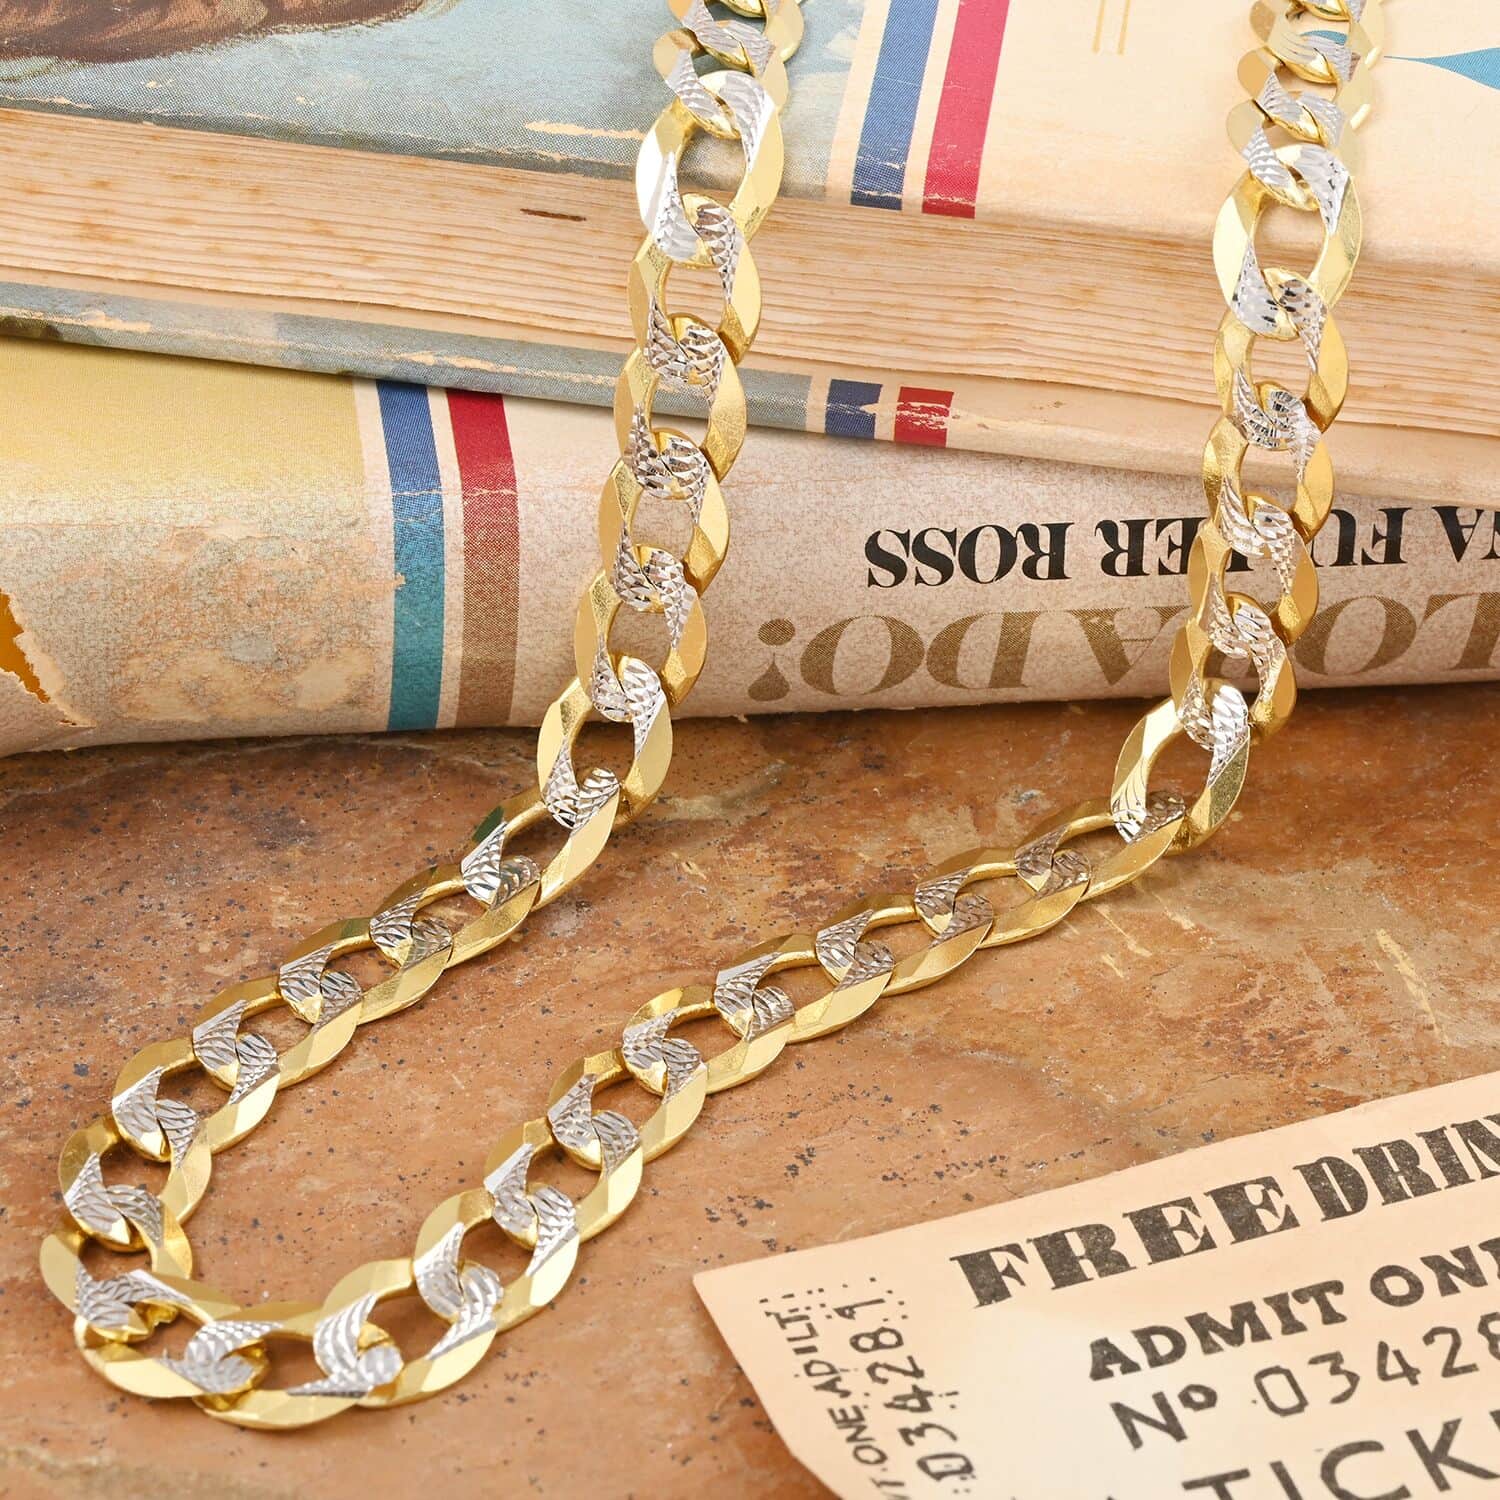 Buy 14K Yellow Gold Diamond-cut Curb Chain Necklace 22 Inches